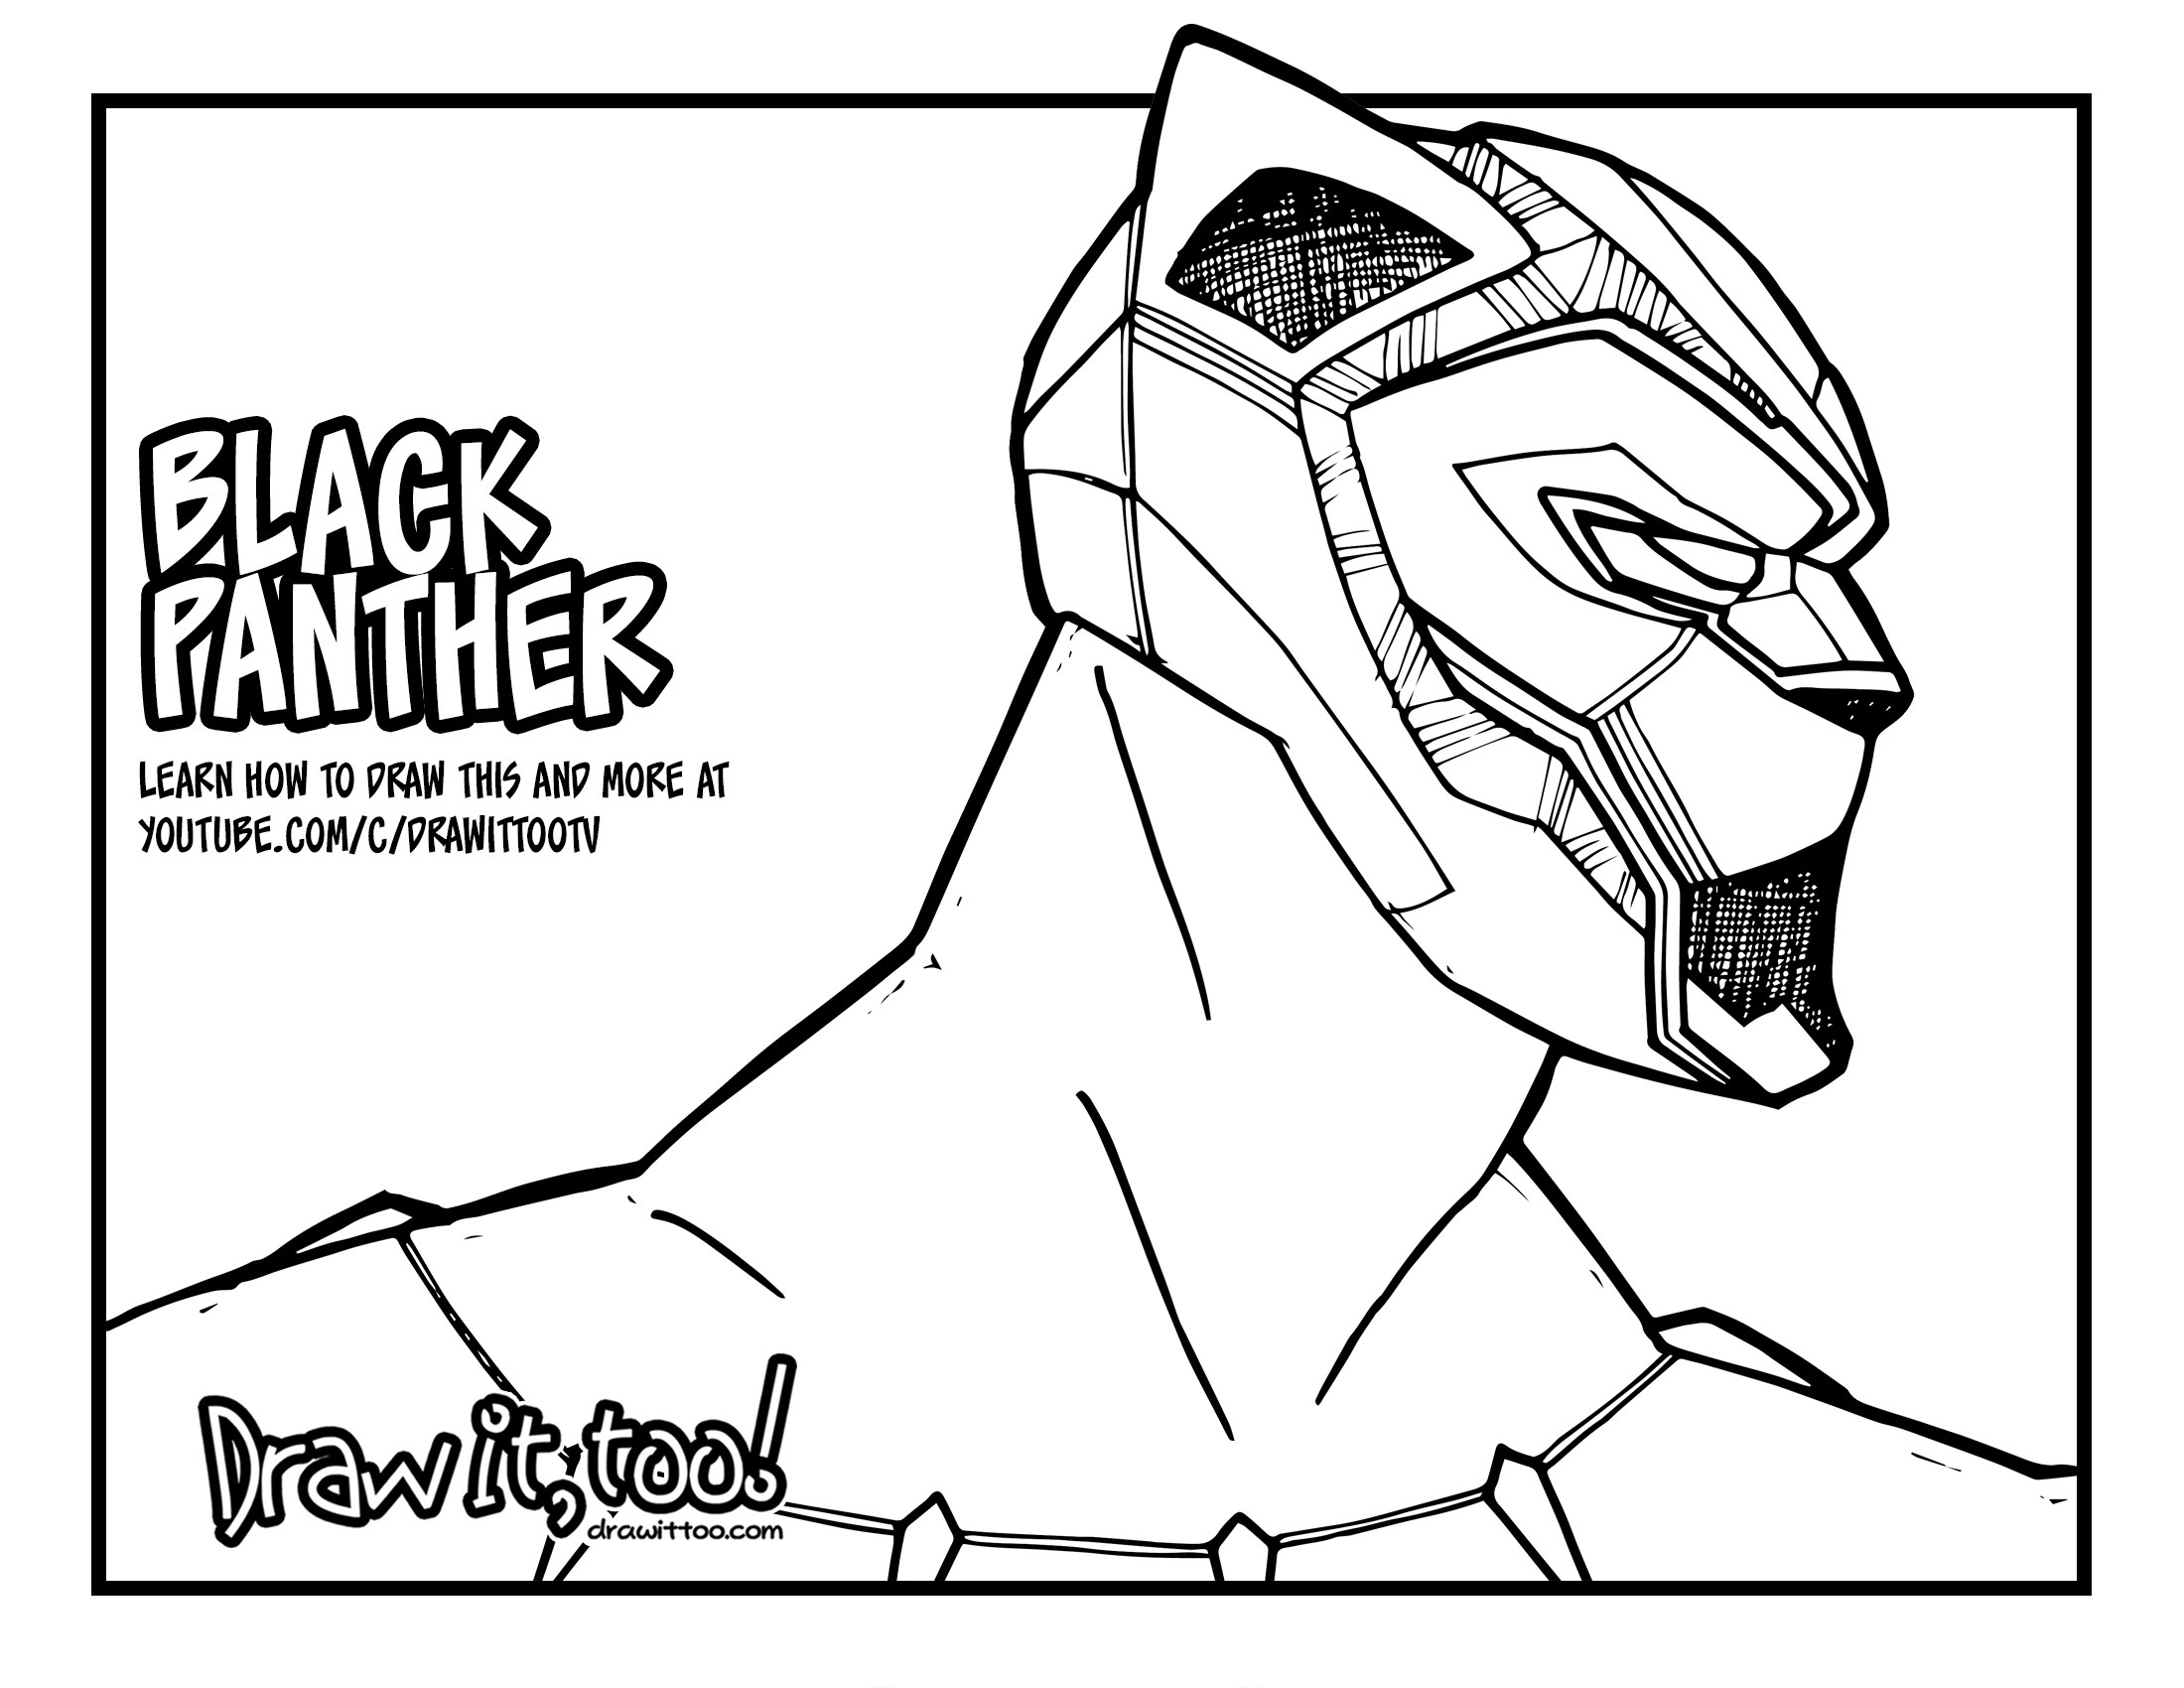 Marvel Black Panther Coloring Pages At Getcolorings.com | Free